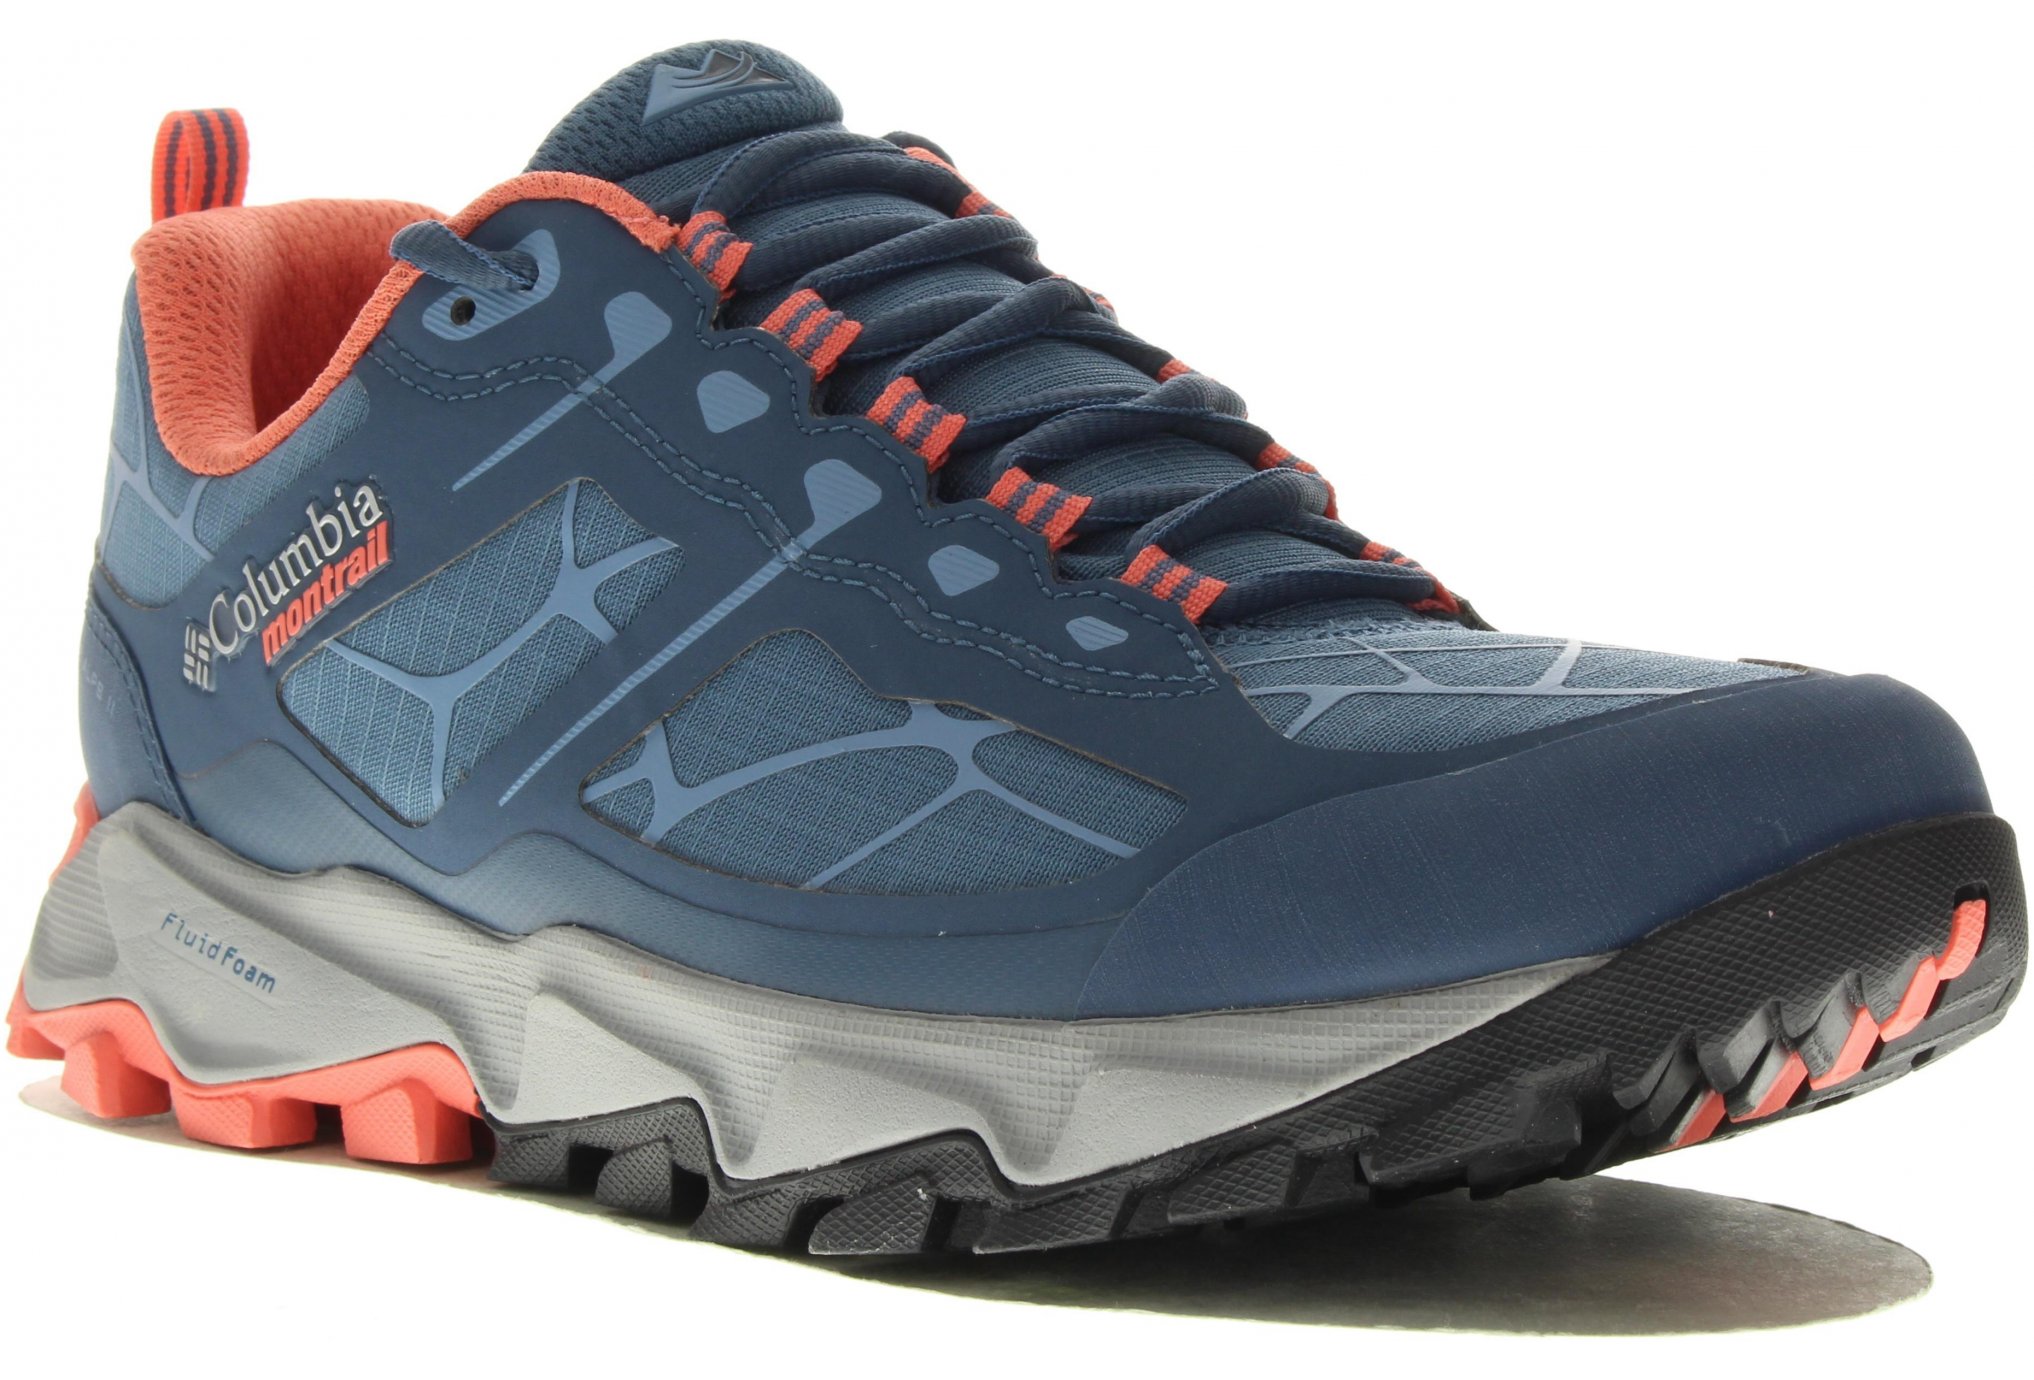 Columbia Montrail trans alps ii w dittique chaussures femme